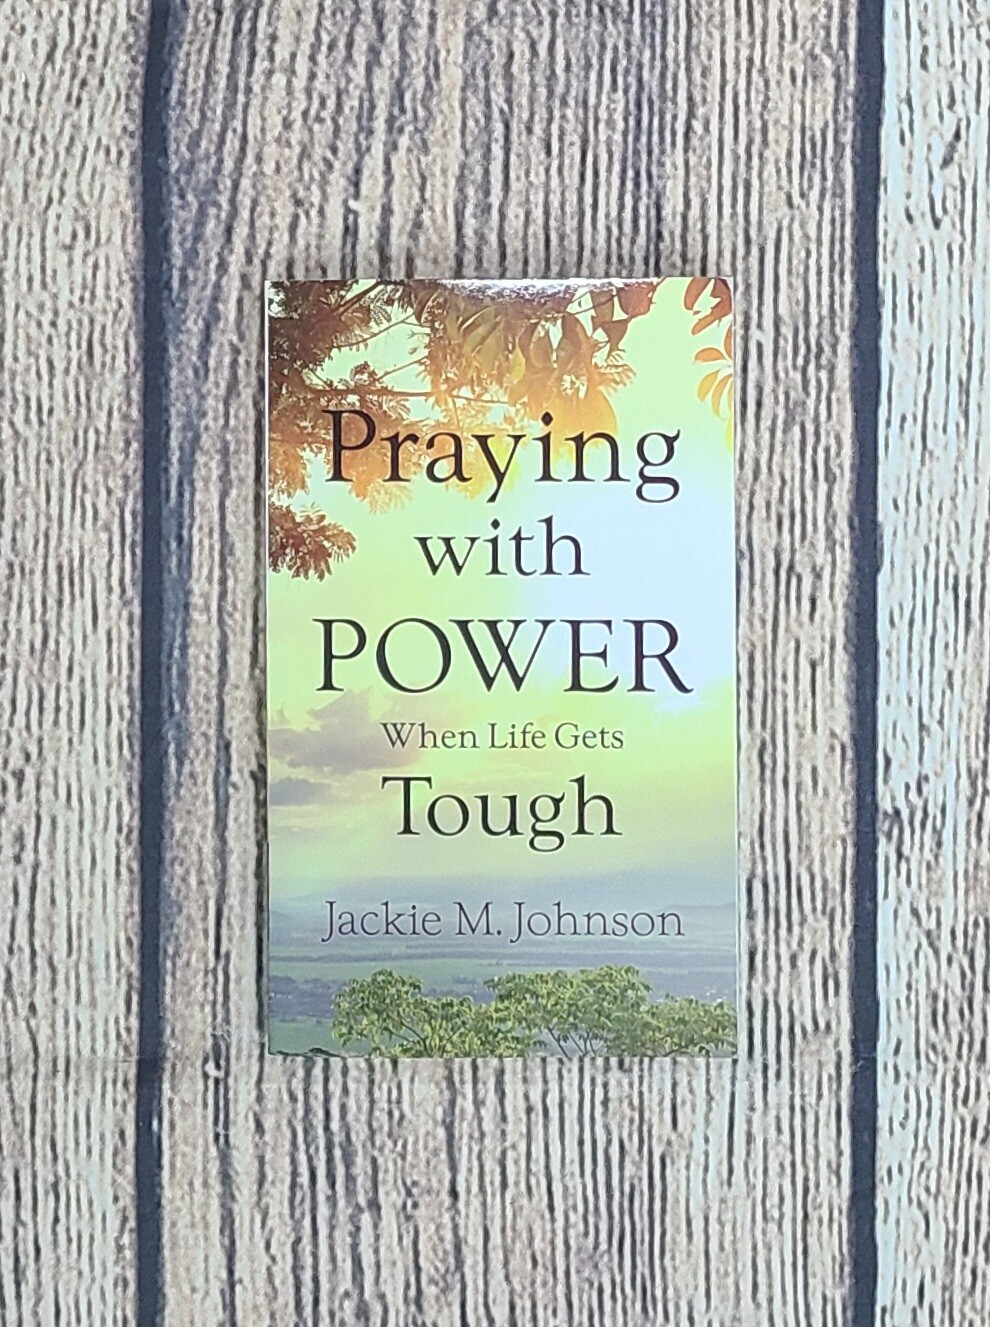 Praying with Power: When Life Gets Tough by Jackie M. Johnson